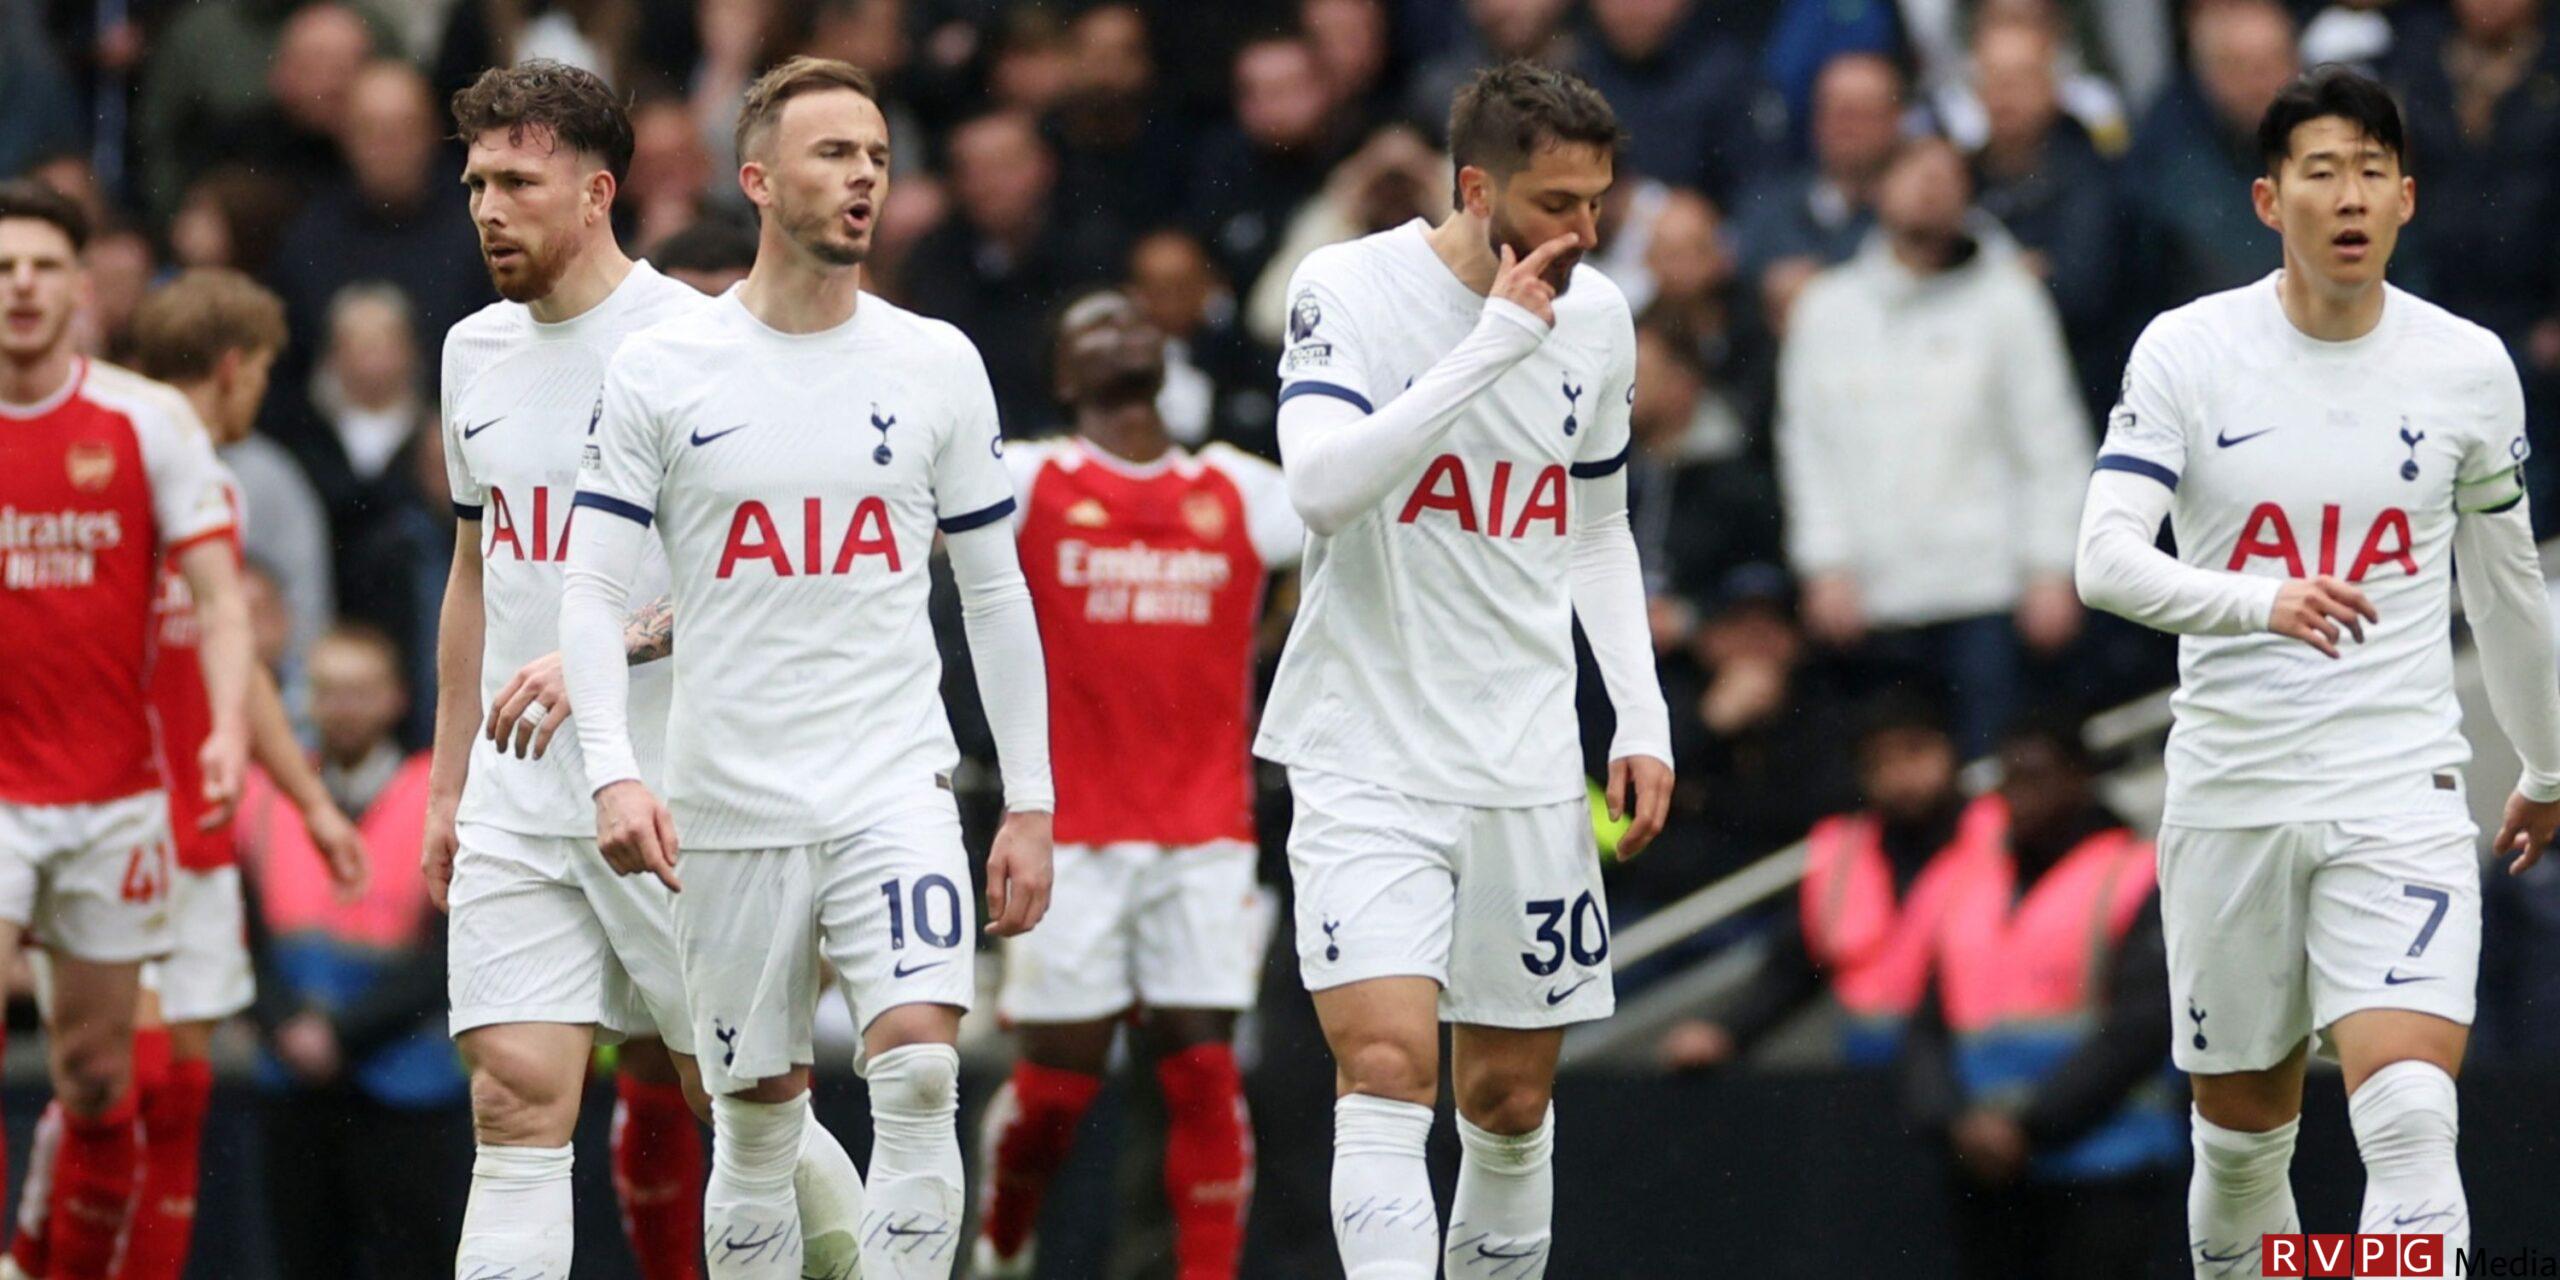 Ange has to drop 3/10 Spurs man who was 'extremely poor' against Arsenal